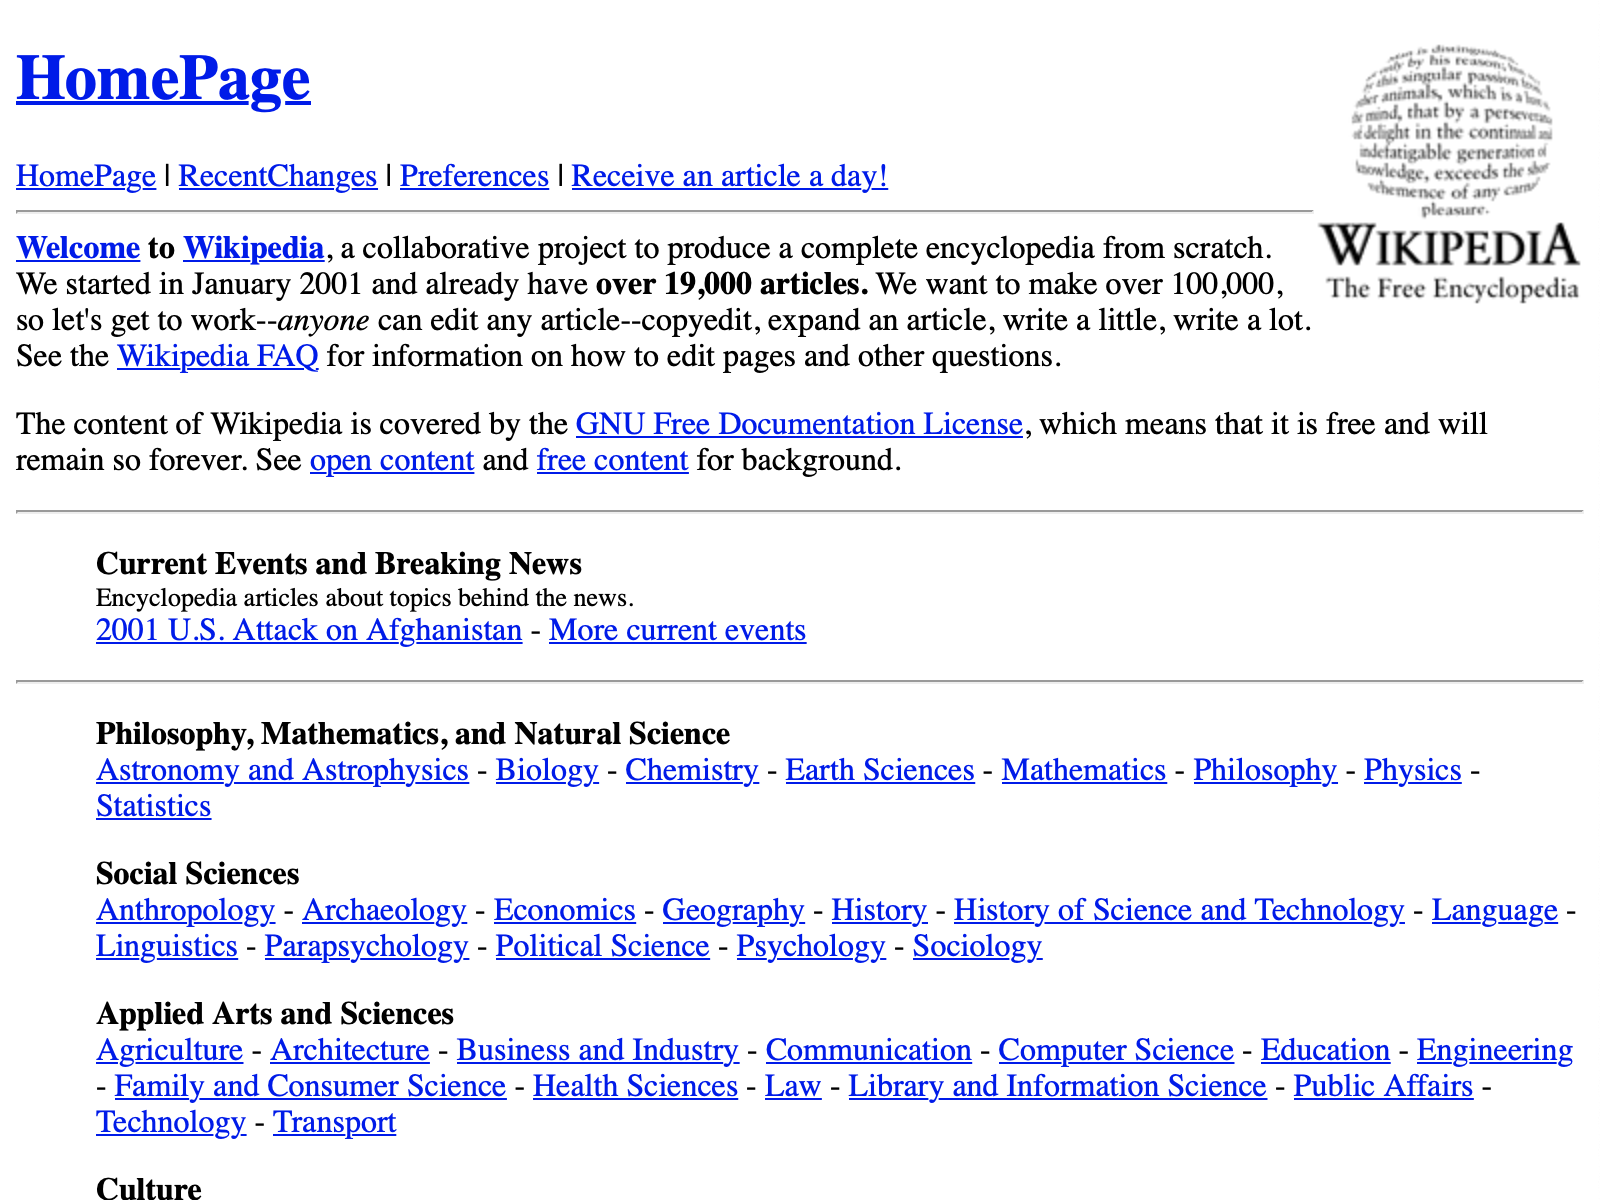 Screenshot of the Wikipedia homepage on December 20, 2001